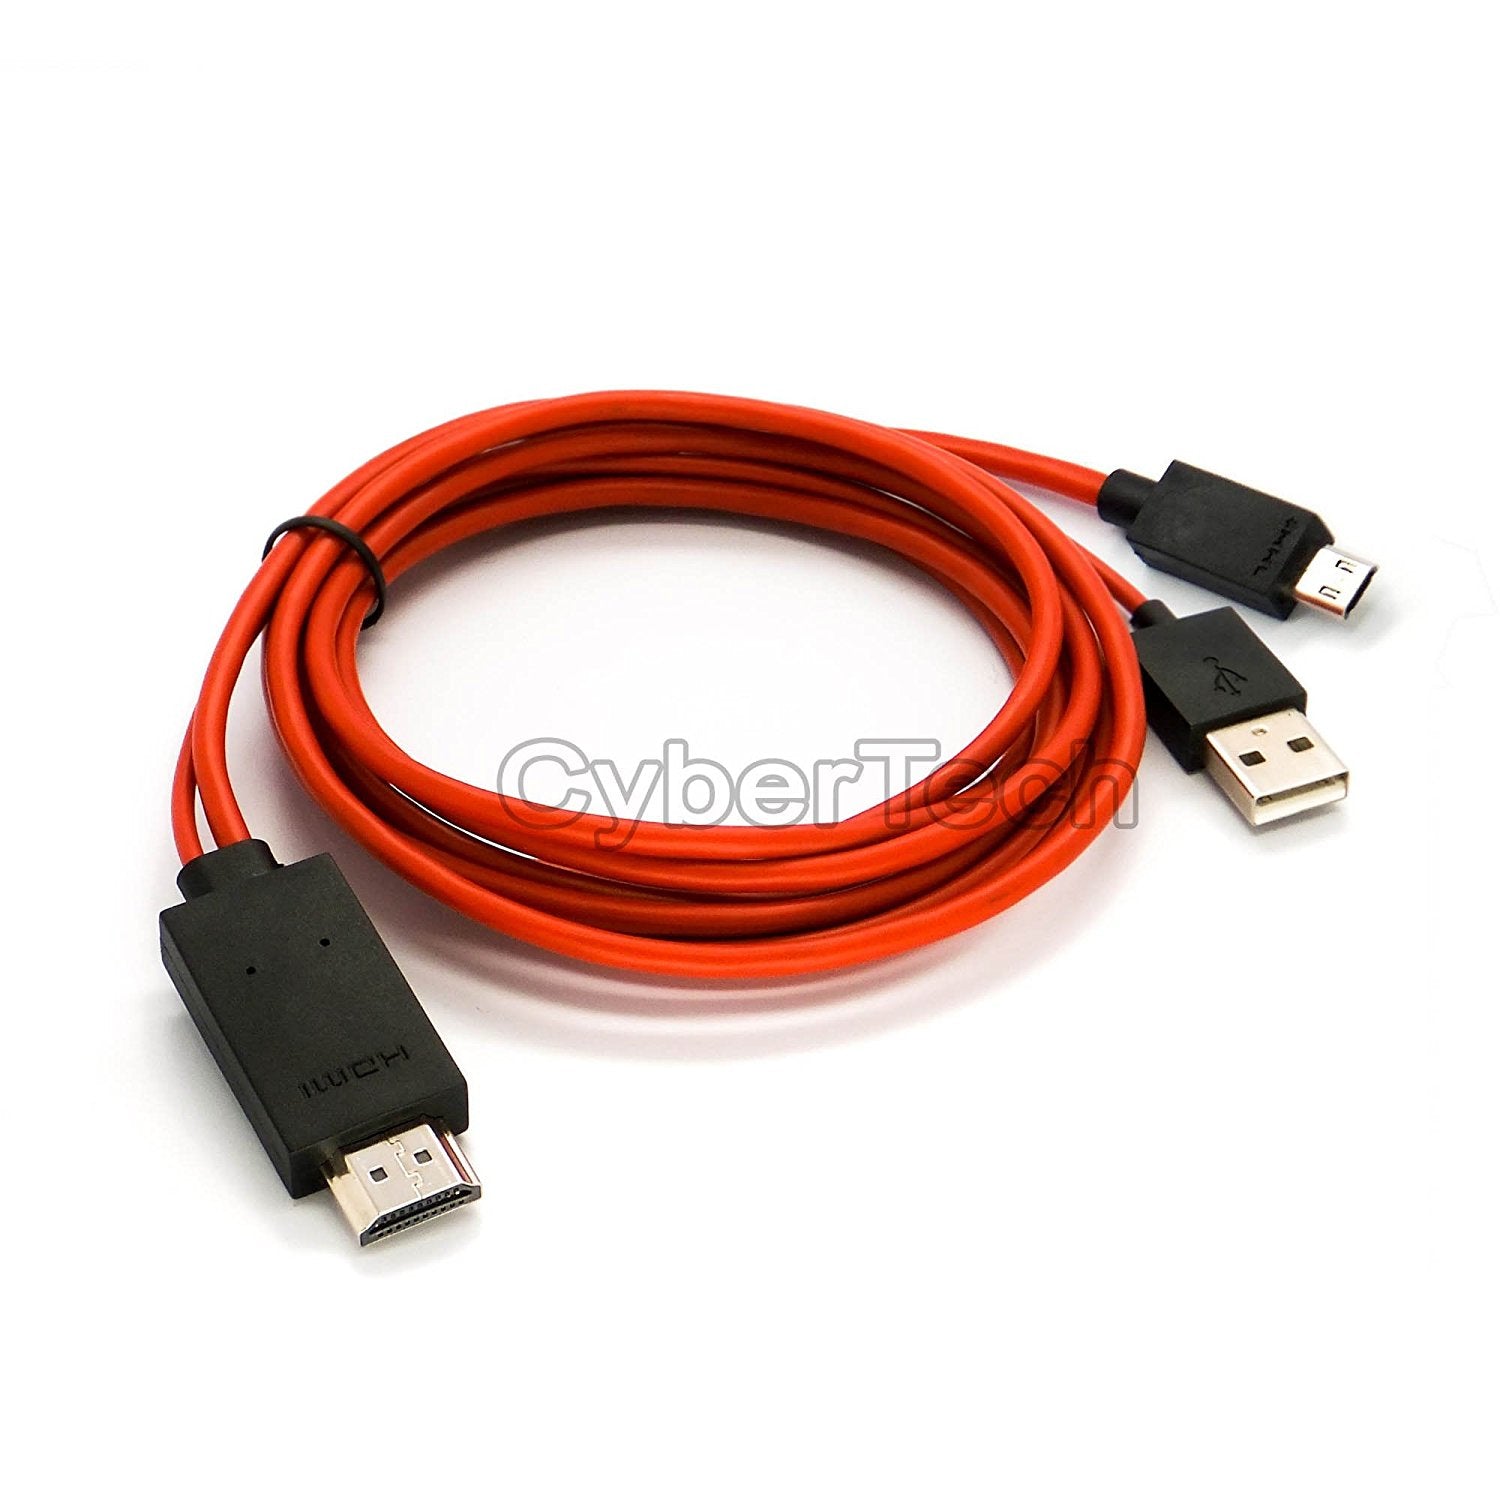 Cybertech USB to HDMI HDTV Adapter for Galaxy Note 2